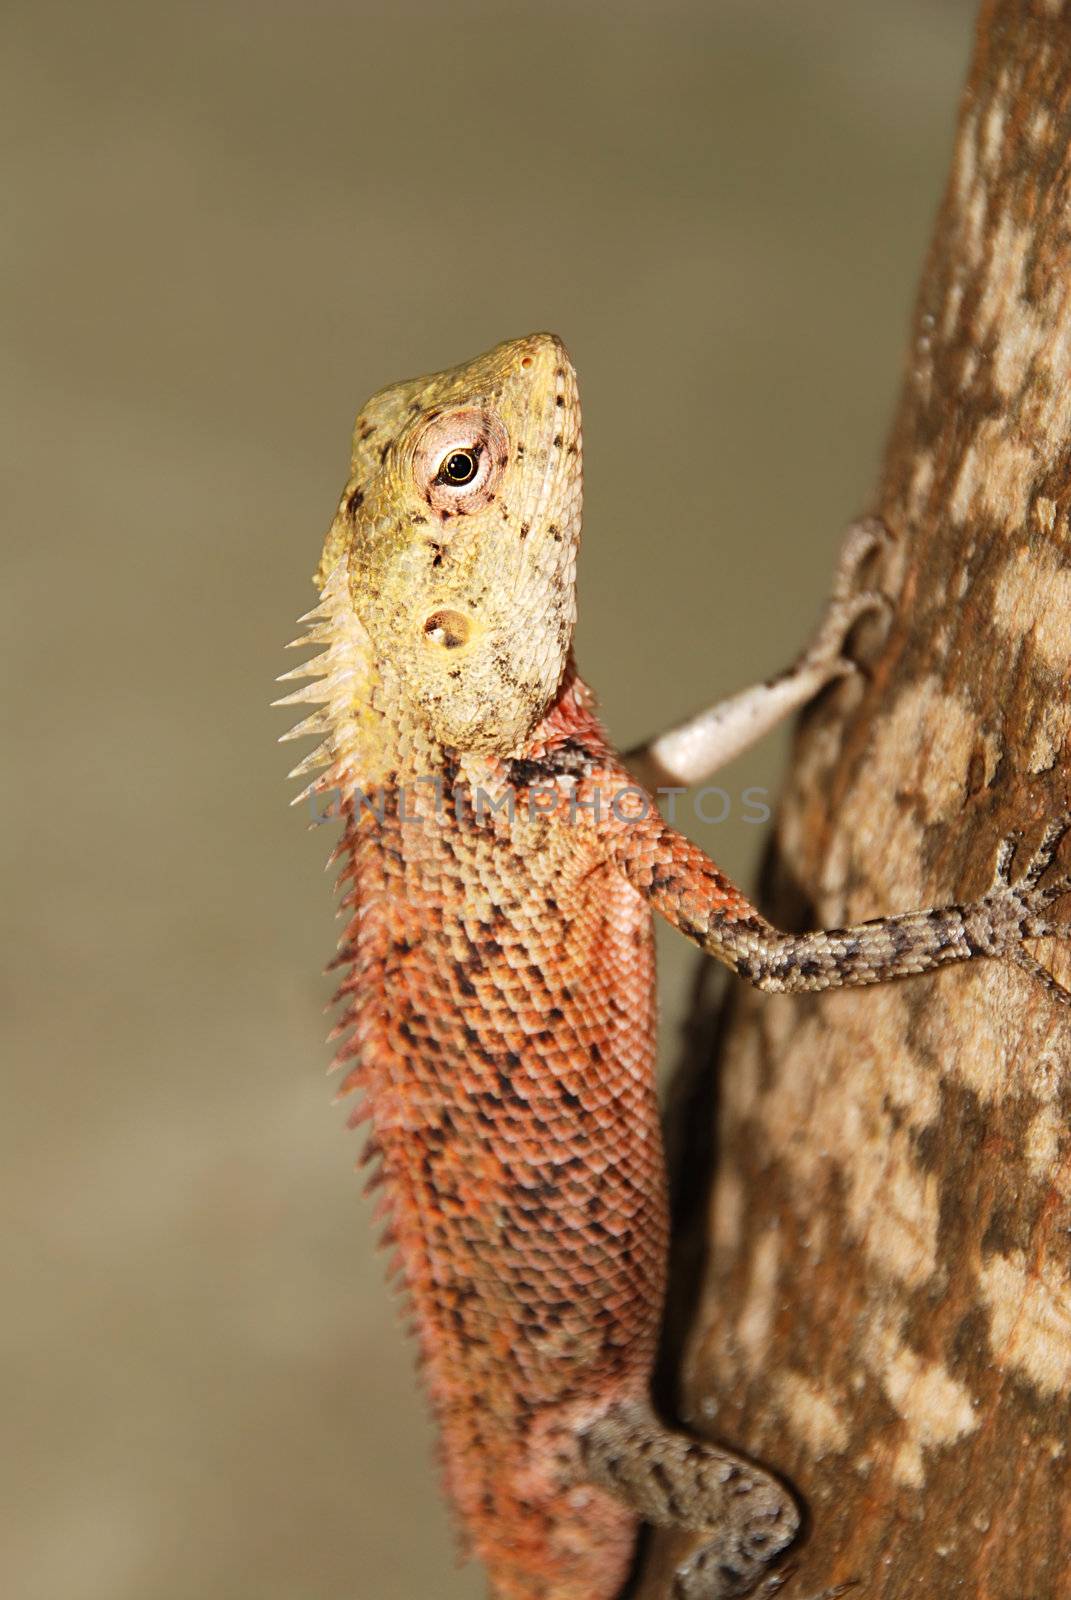 Small tropical gecko sitting on a wooden branch